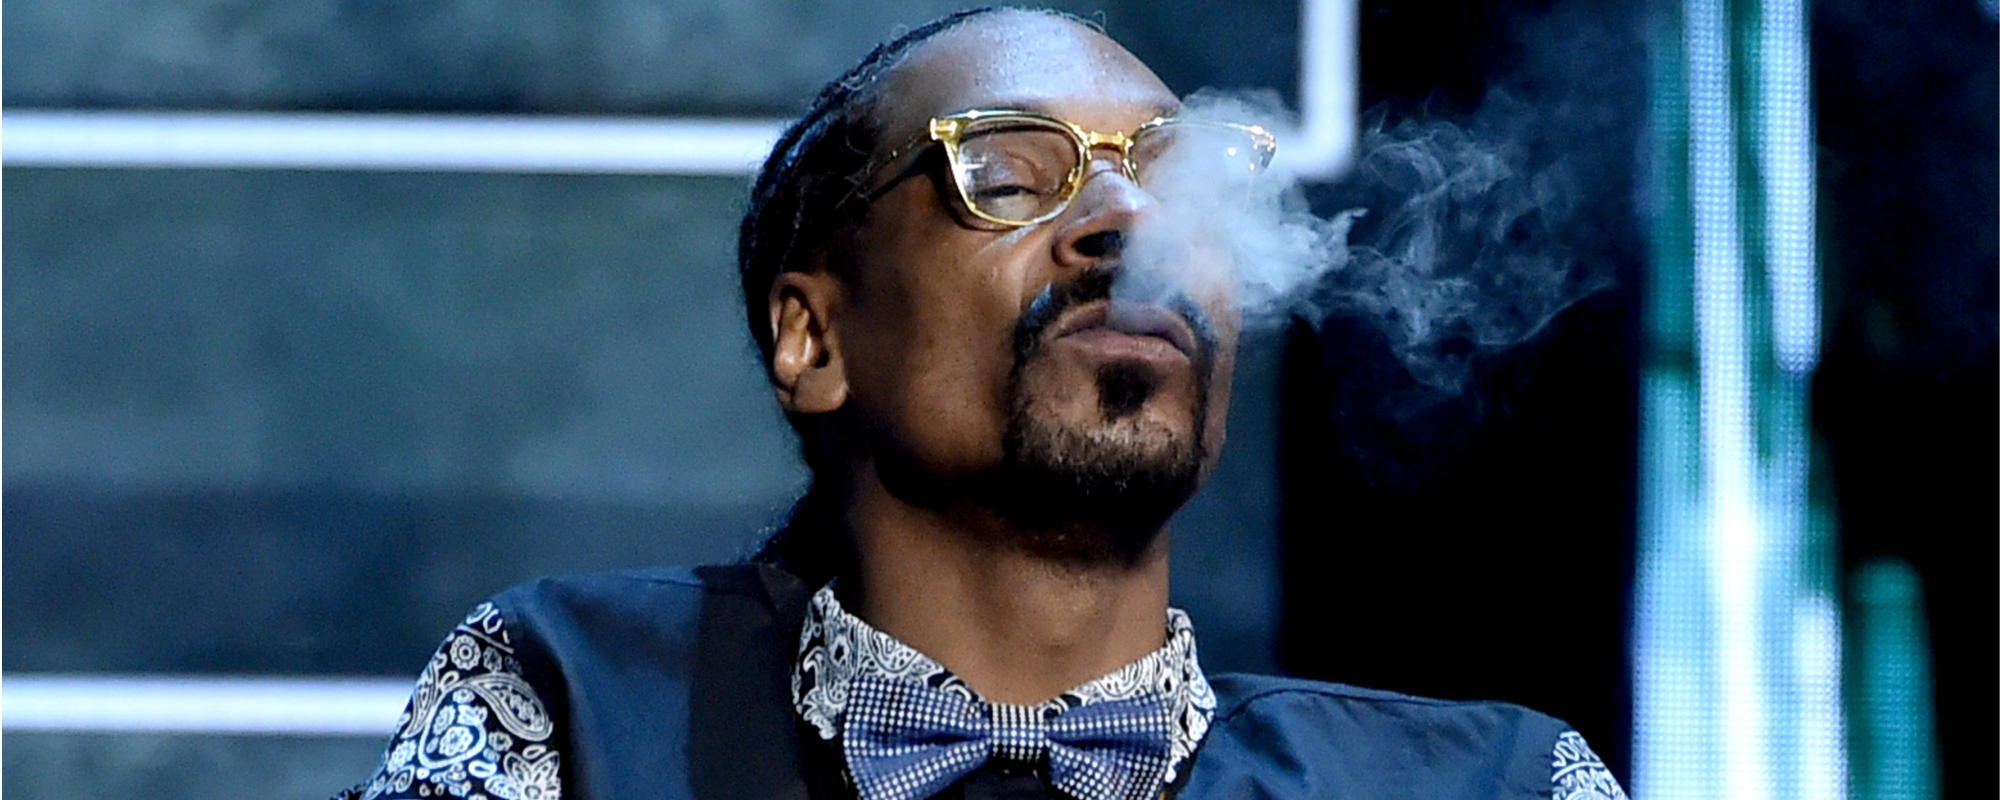 Snoop Dogg is Really Quitting Smoke, Just Not in the Way You Think